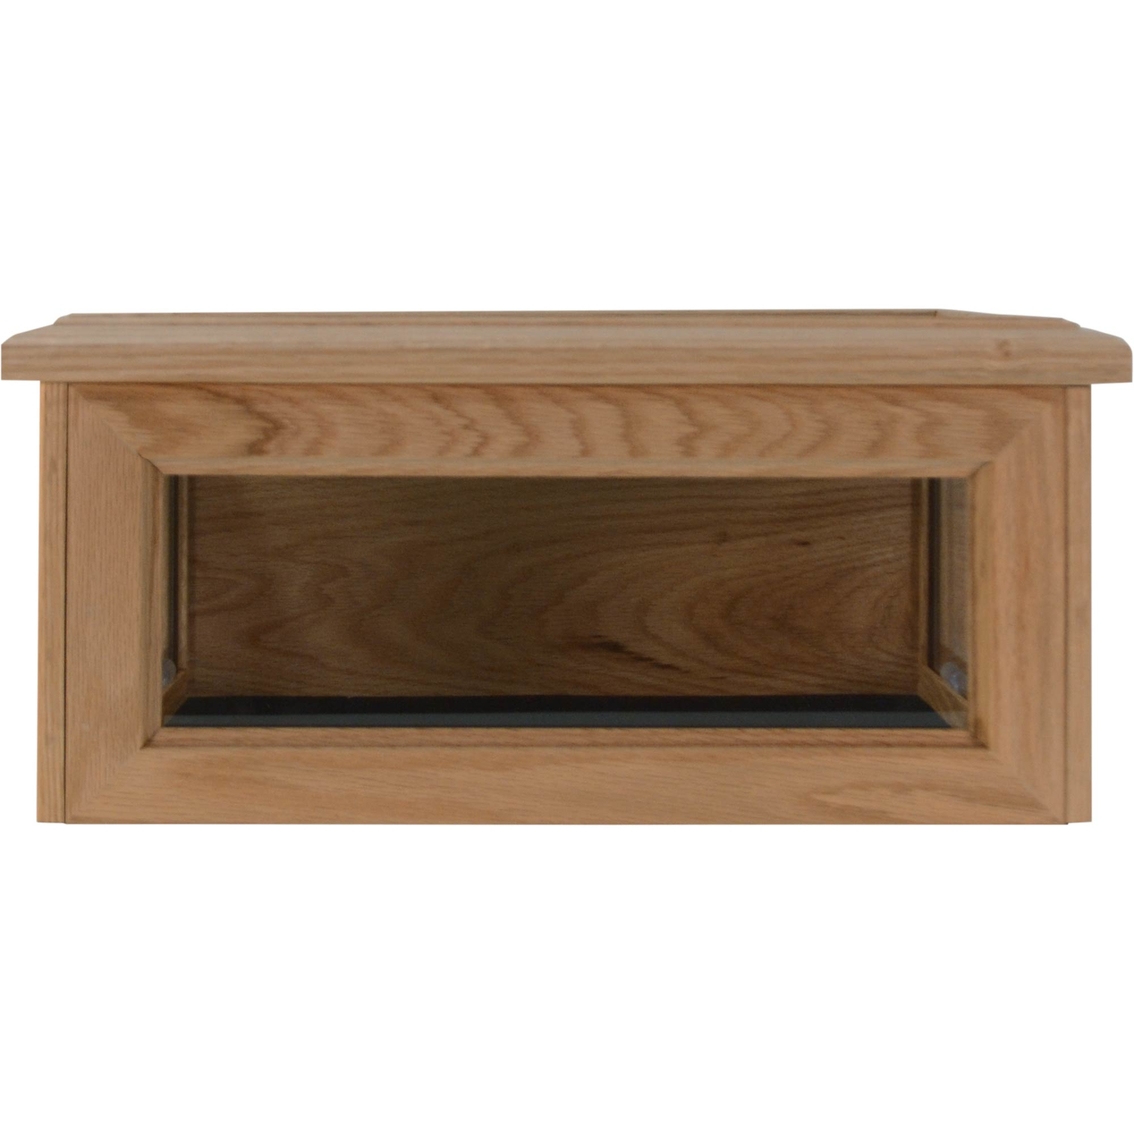 DomEx Hardwoods Hat/Cover Box, Glass Top, Oak - Image 2 of 3